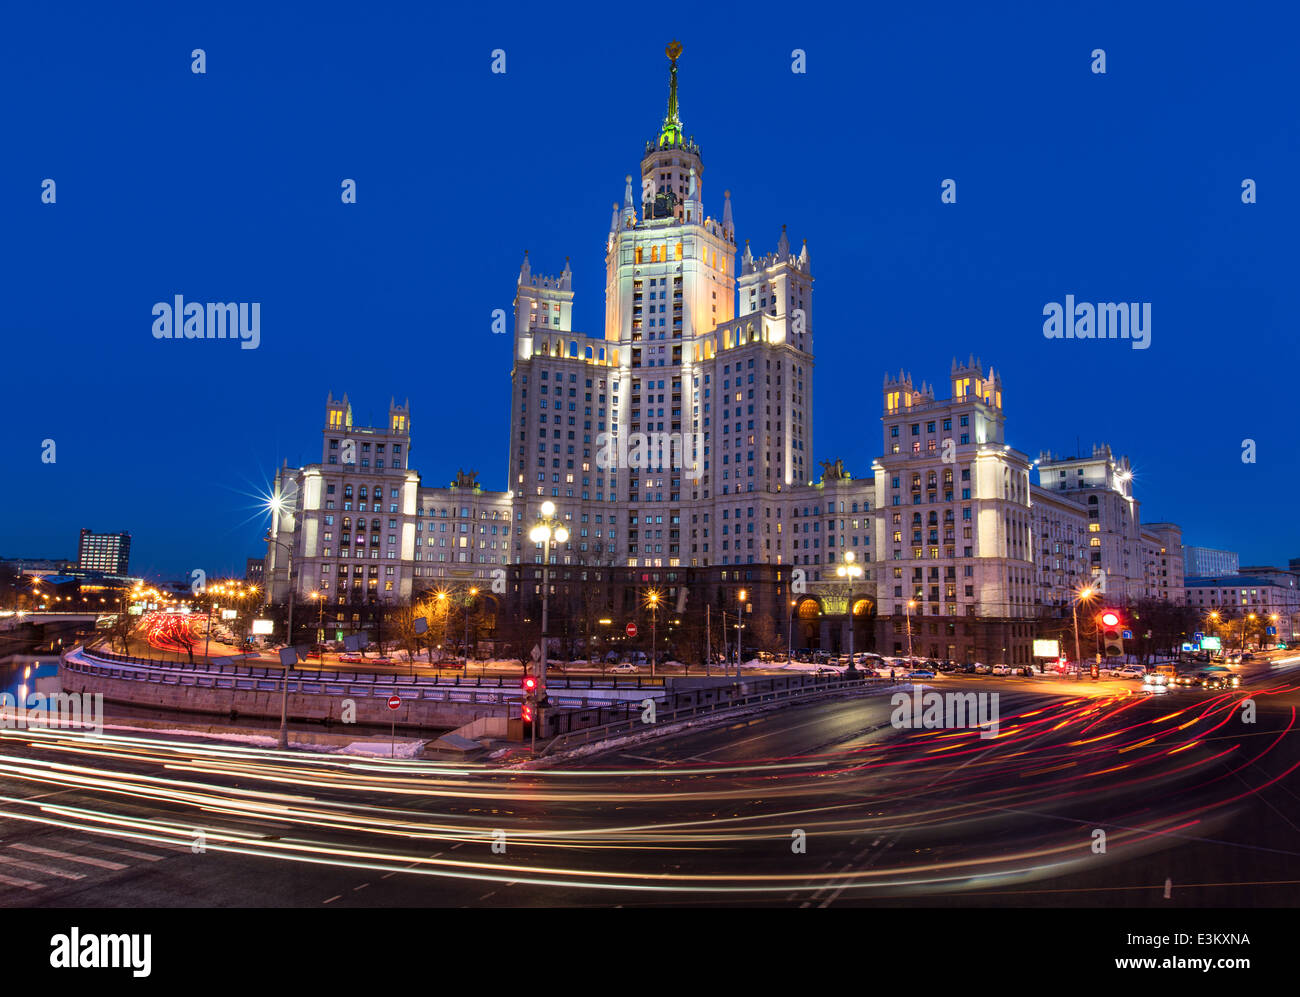 Night view of Stalin skyscraper at Kotelnicheskya embankment in center of Moscow, Russia Stock Photo